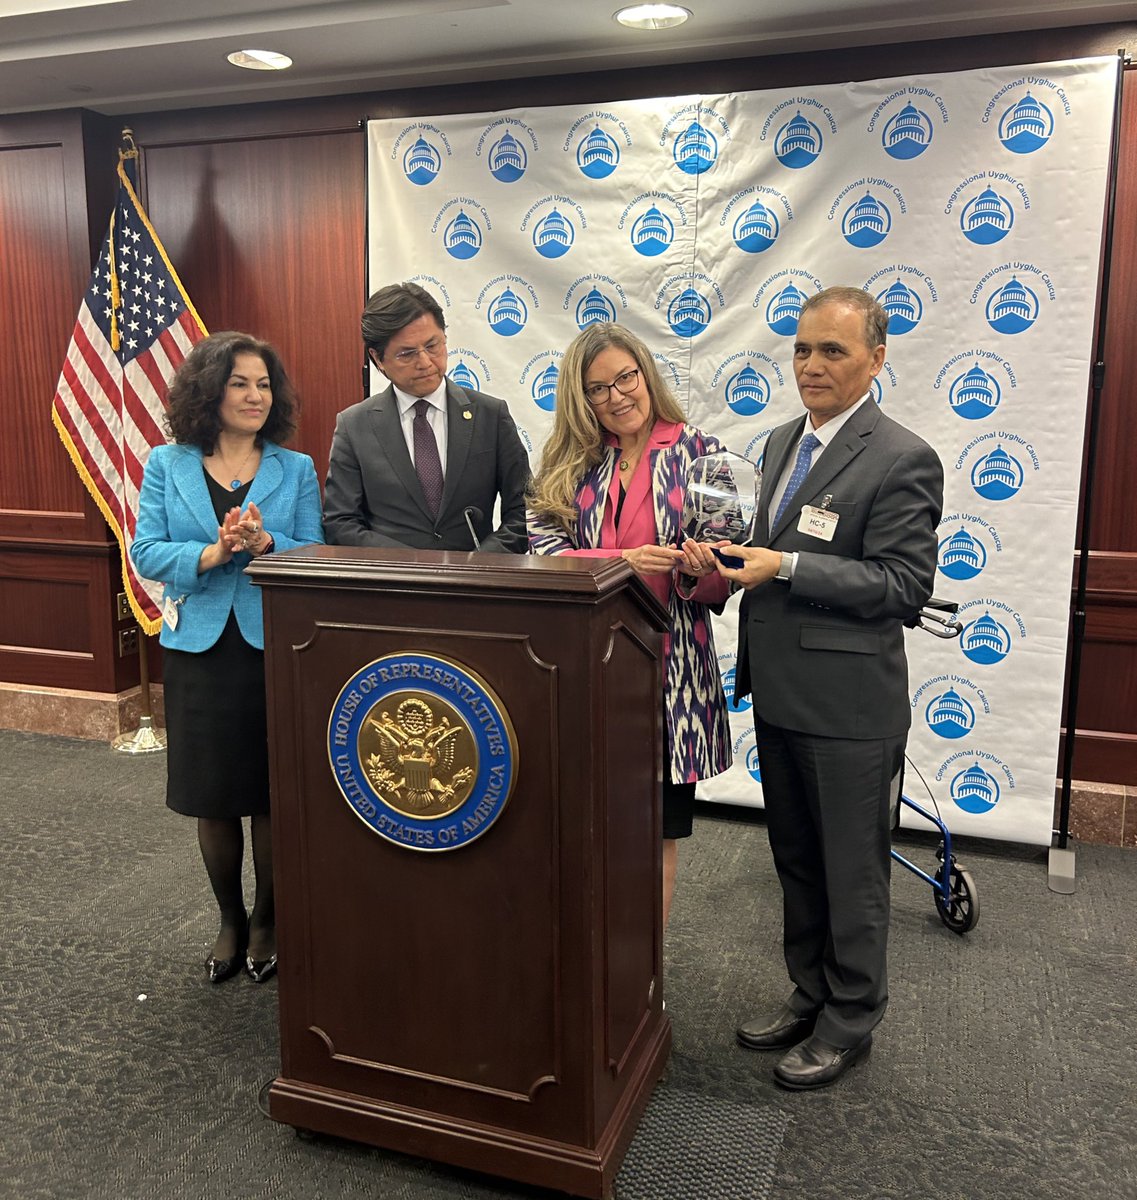 Fighting for Uyghur human rights has been a top priority for me in Congress. I was honored to be recognized during today's Uyghur Caucus reception for the ways I've worked to shine a light on this genocide and keep products from forced labor off of American store shelves.